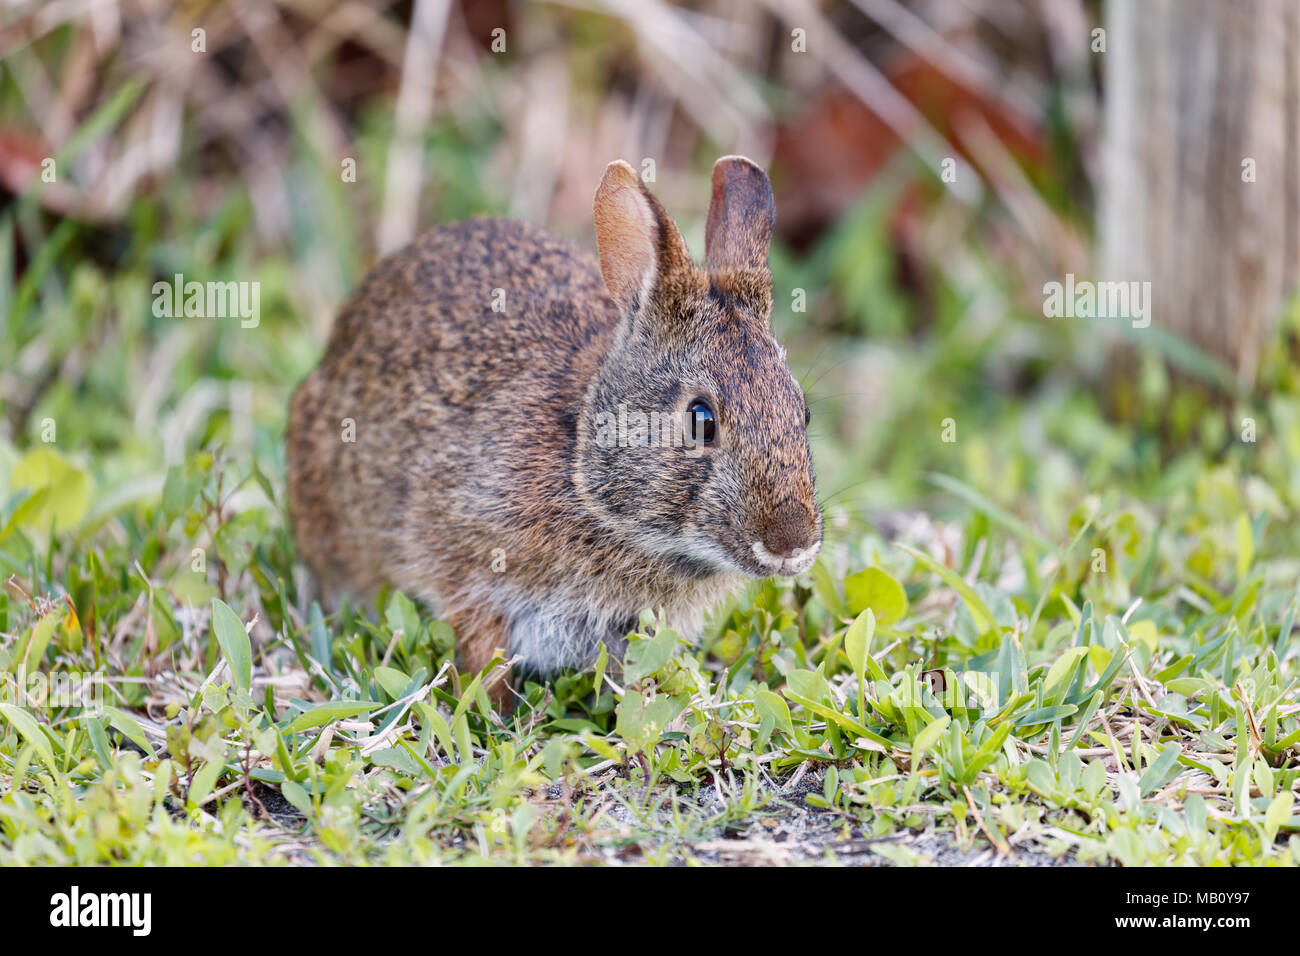 Marsh rabbit half from the site on the grass, Florida, USA Stock Photo